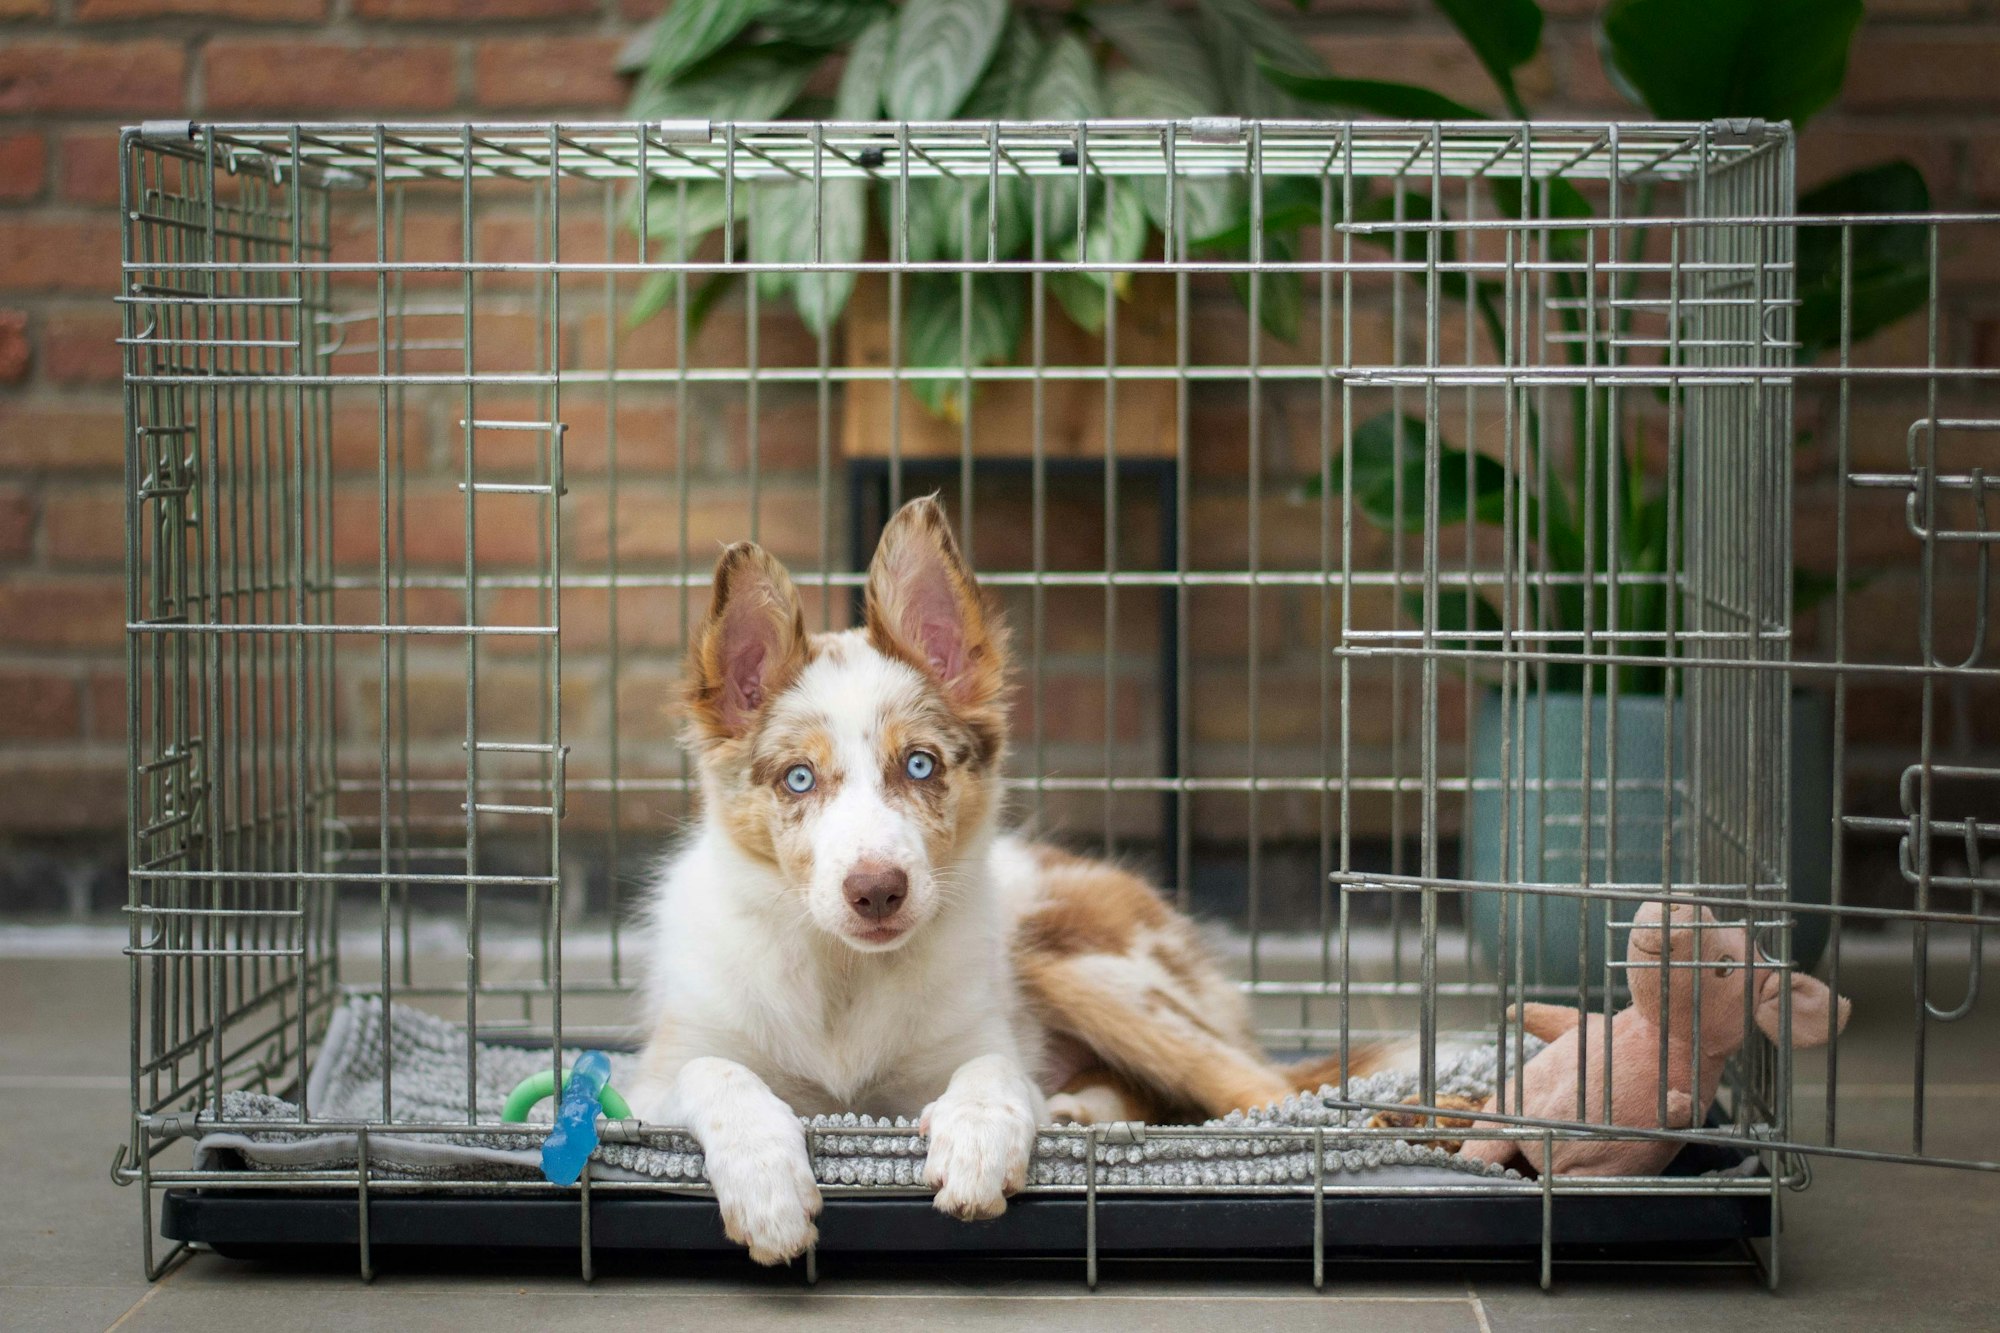 Dog Peeing in Crate Due to Separation Anxiety